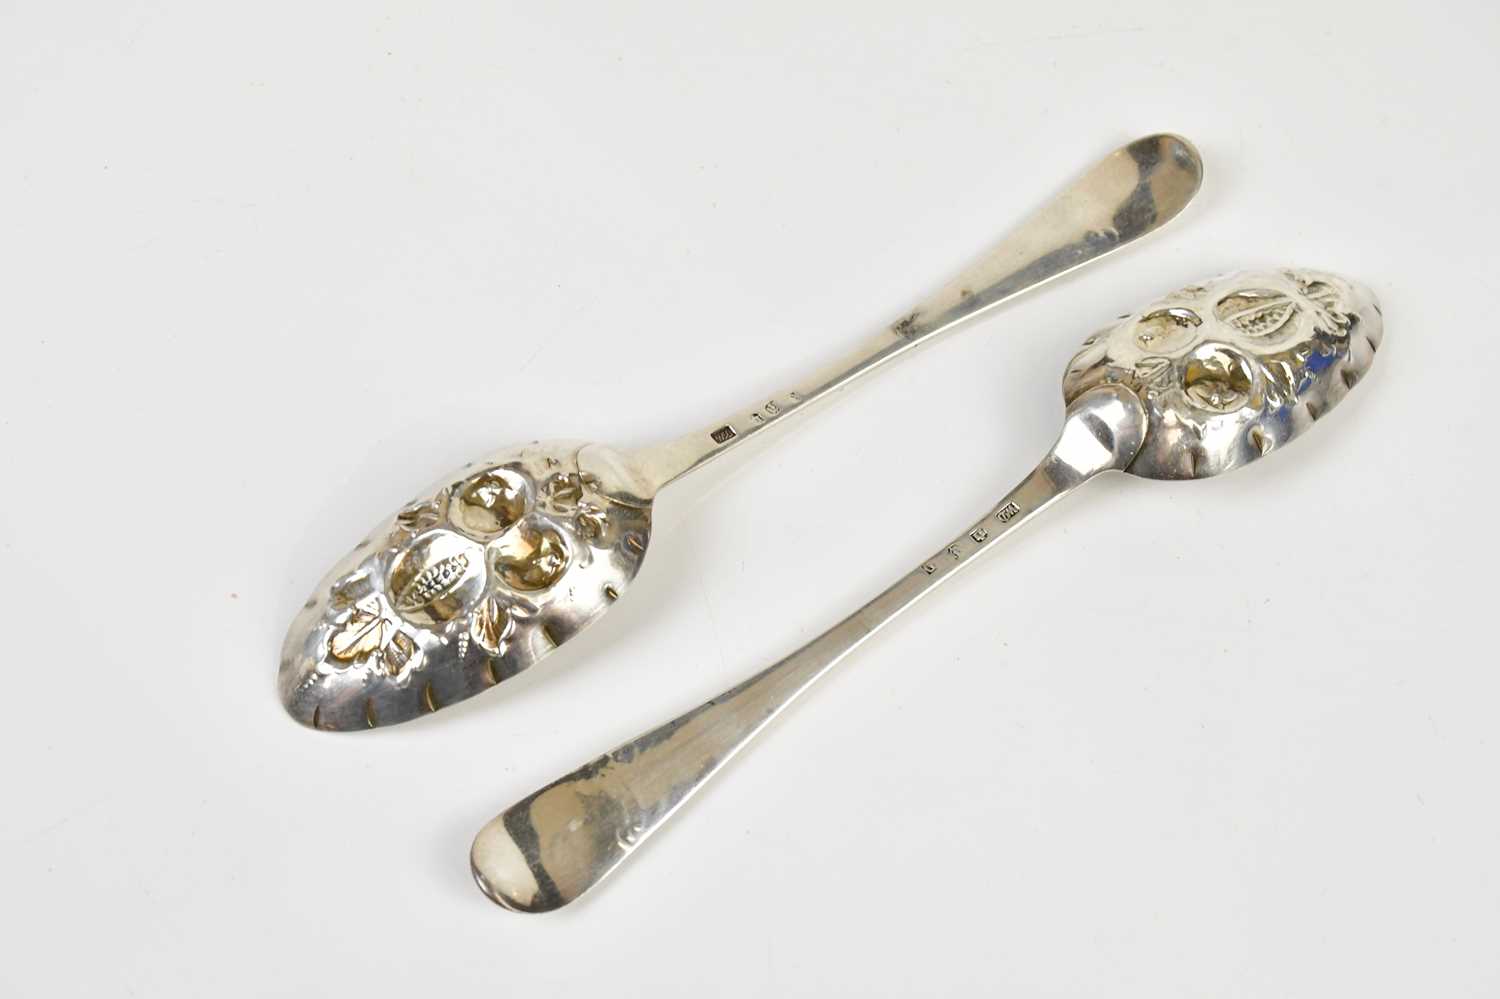 WILLIAM DAVIE; a pair of George III hallmarked silver berry spoons, Edinburgh 1783 (probably), - Image 5 of 6